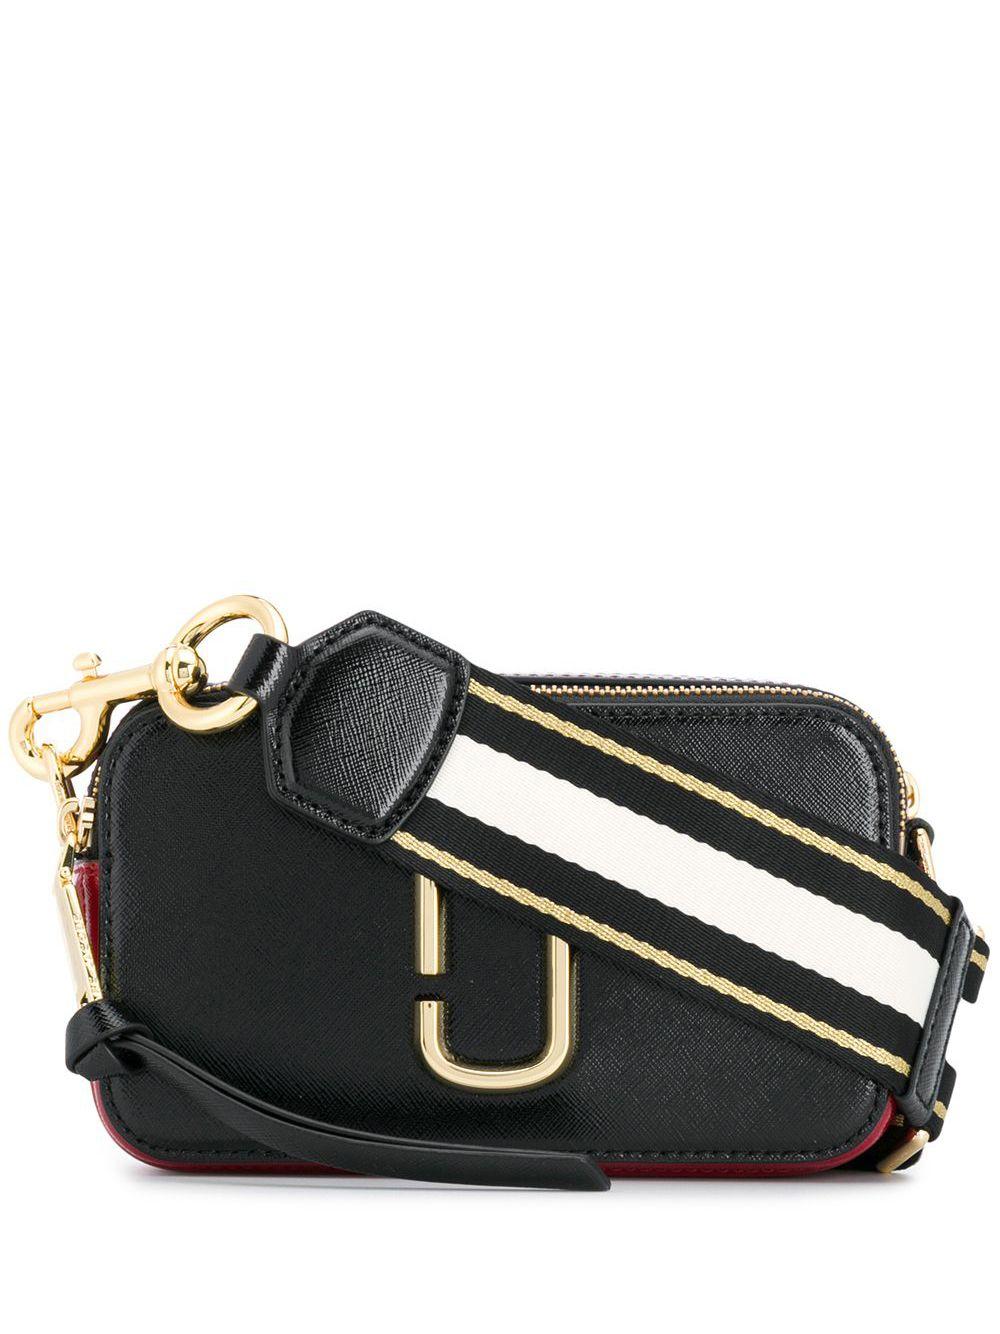 Marc Jacobs Leather The Snapshot Camera Bag in Black - Lyst